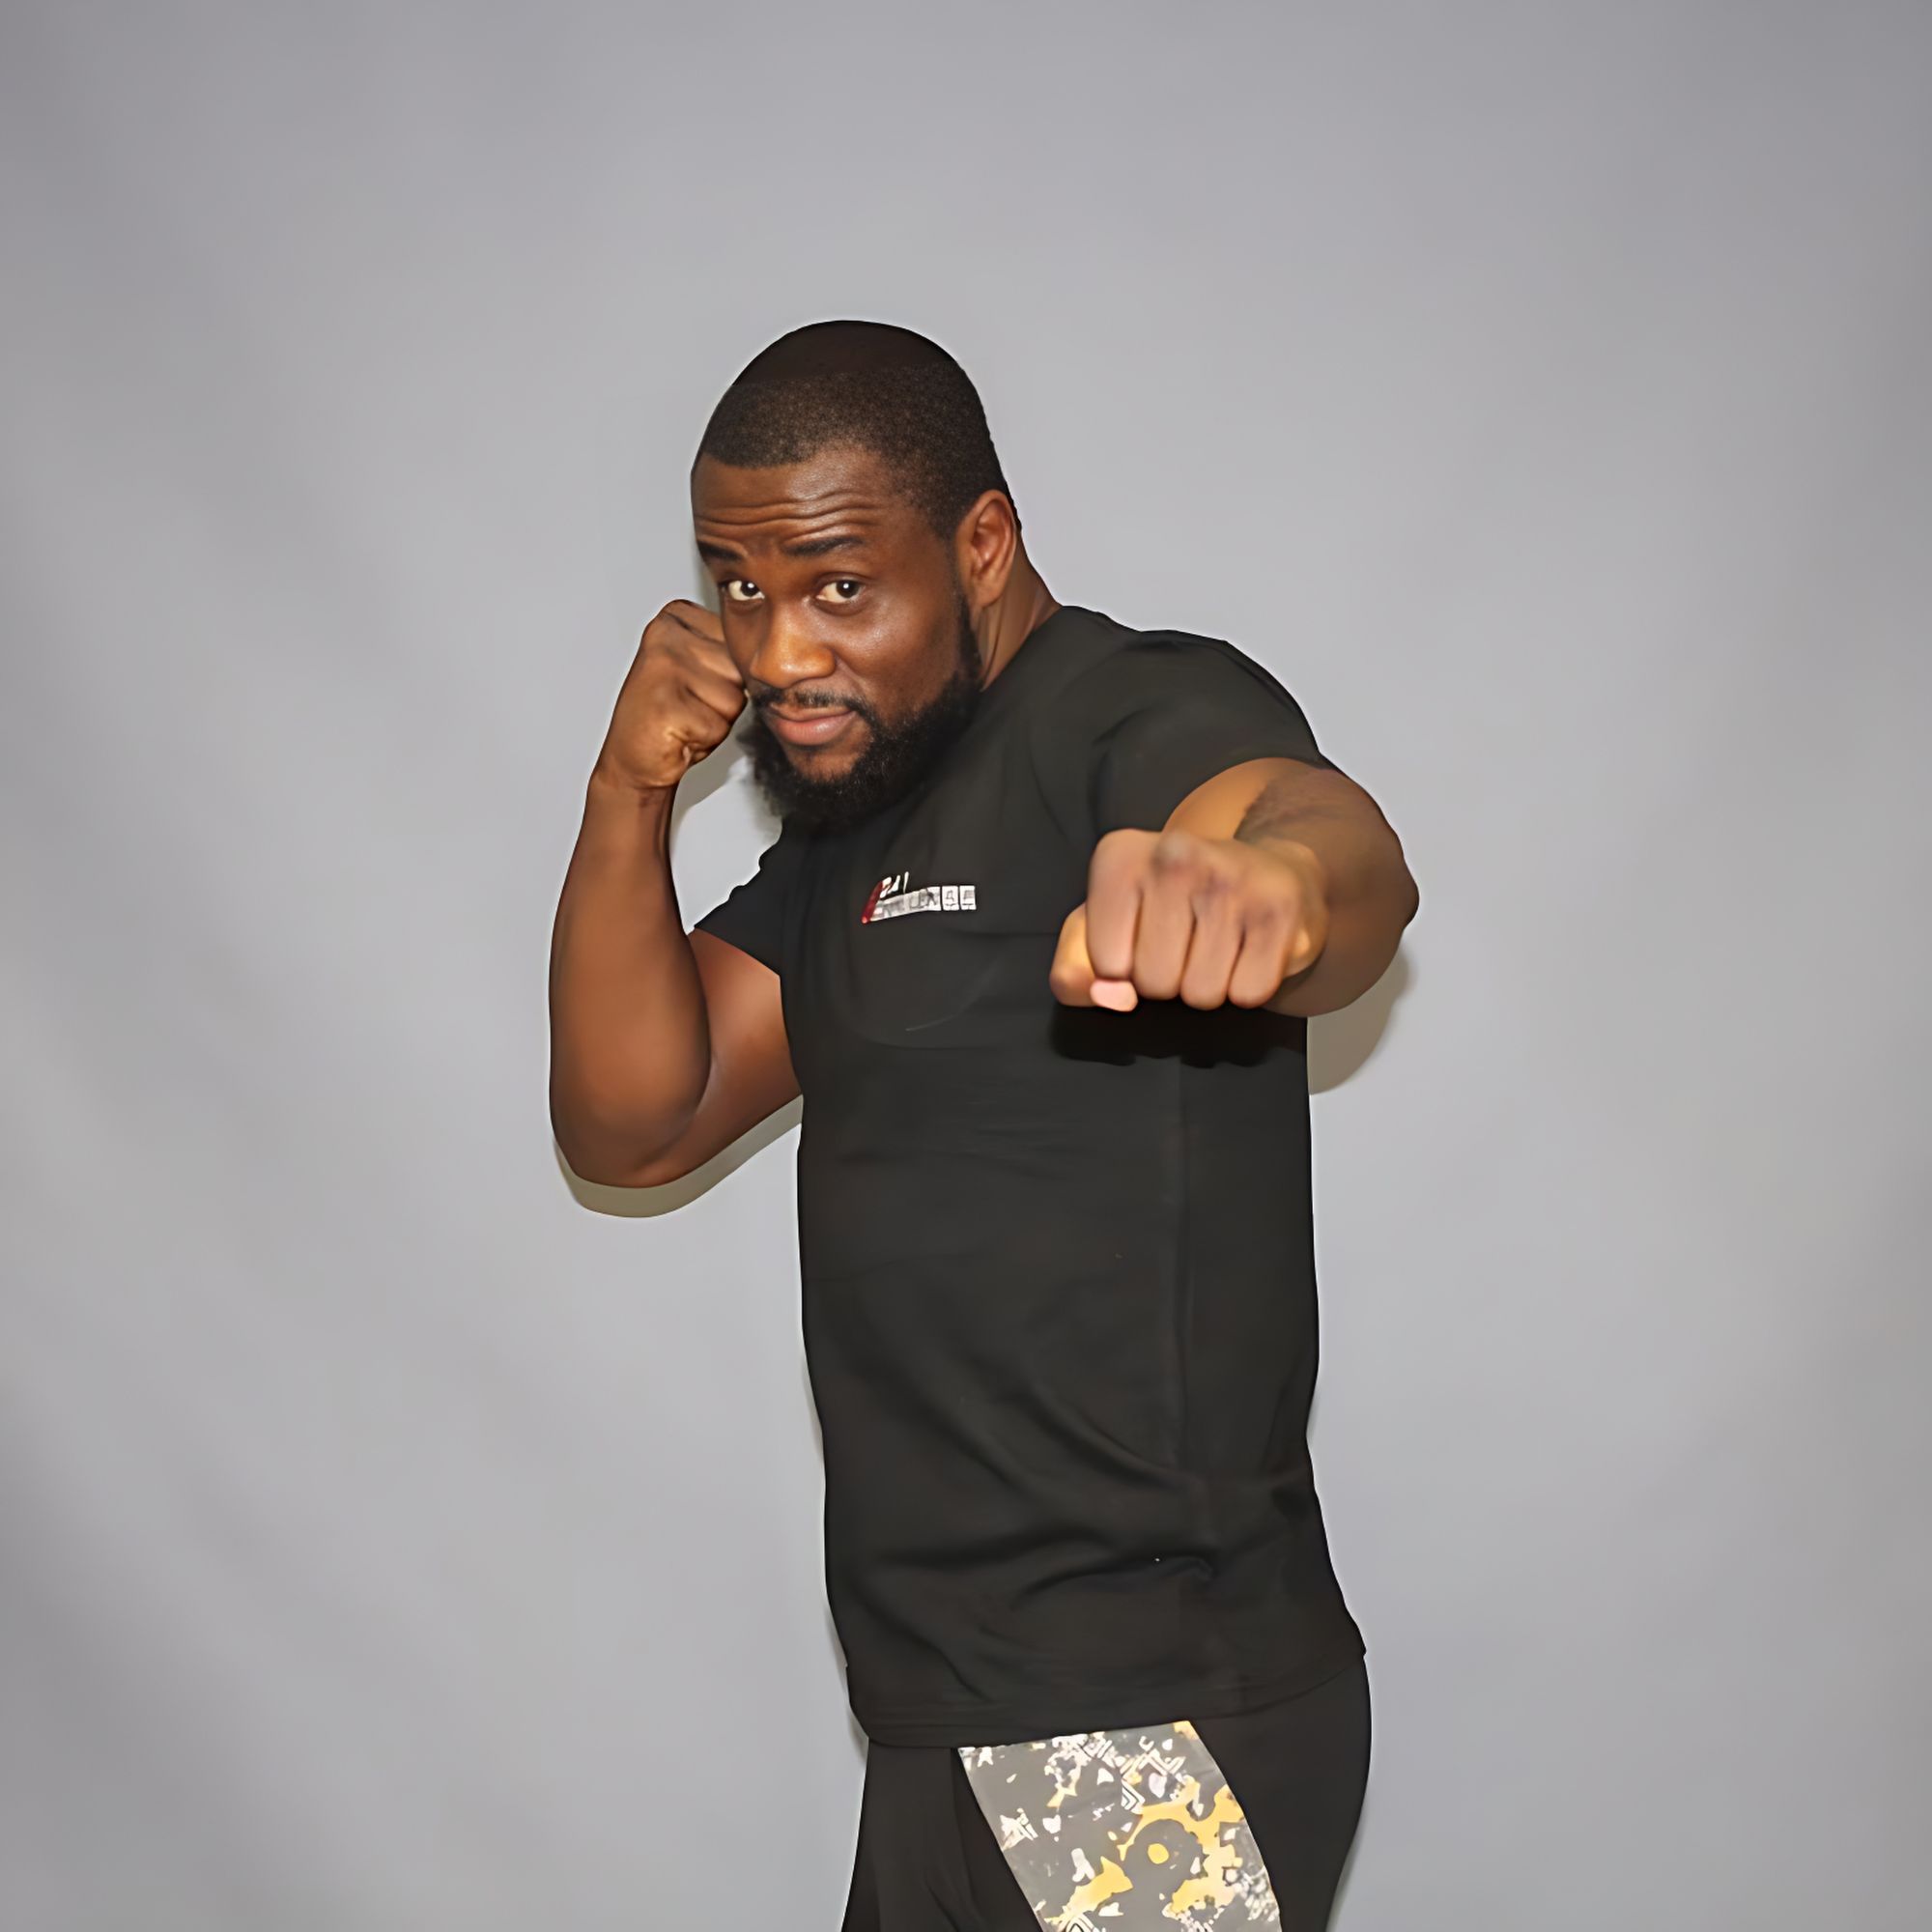 Simon 'Silverback' Domingos To Take Part In Inaugural South African Bare Knuckle Fighting Championship